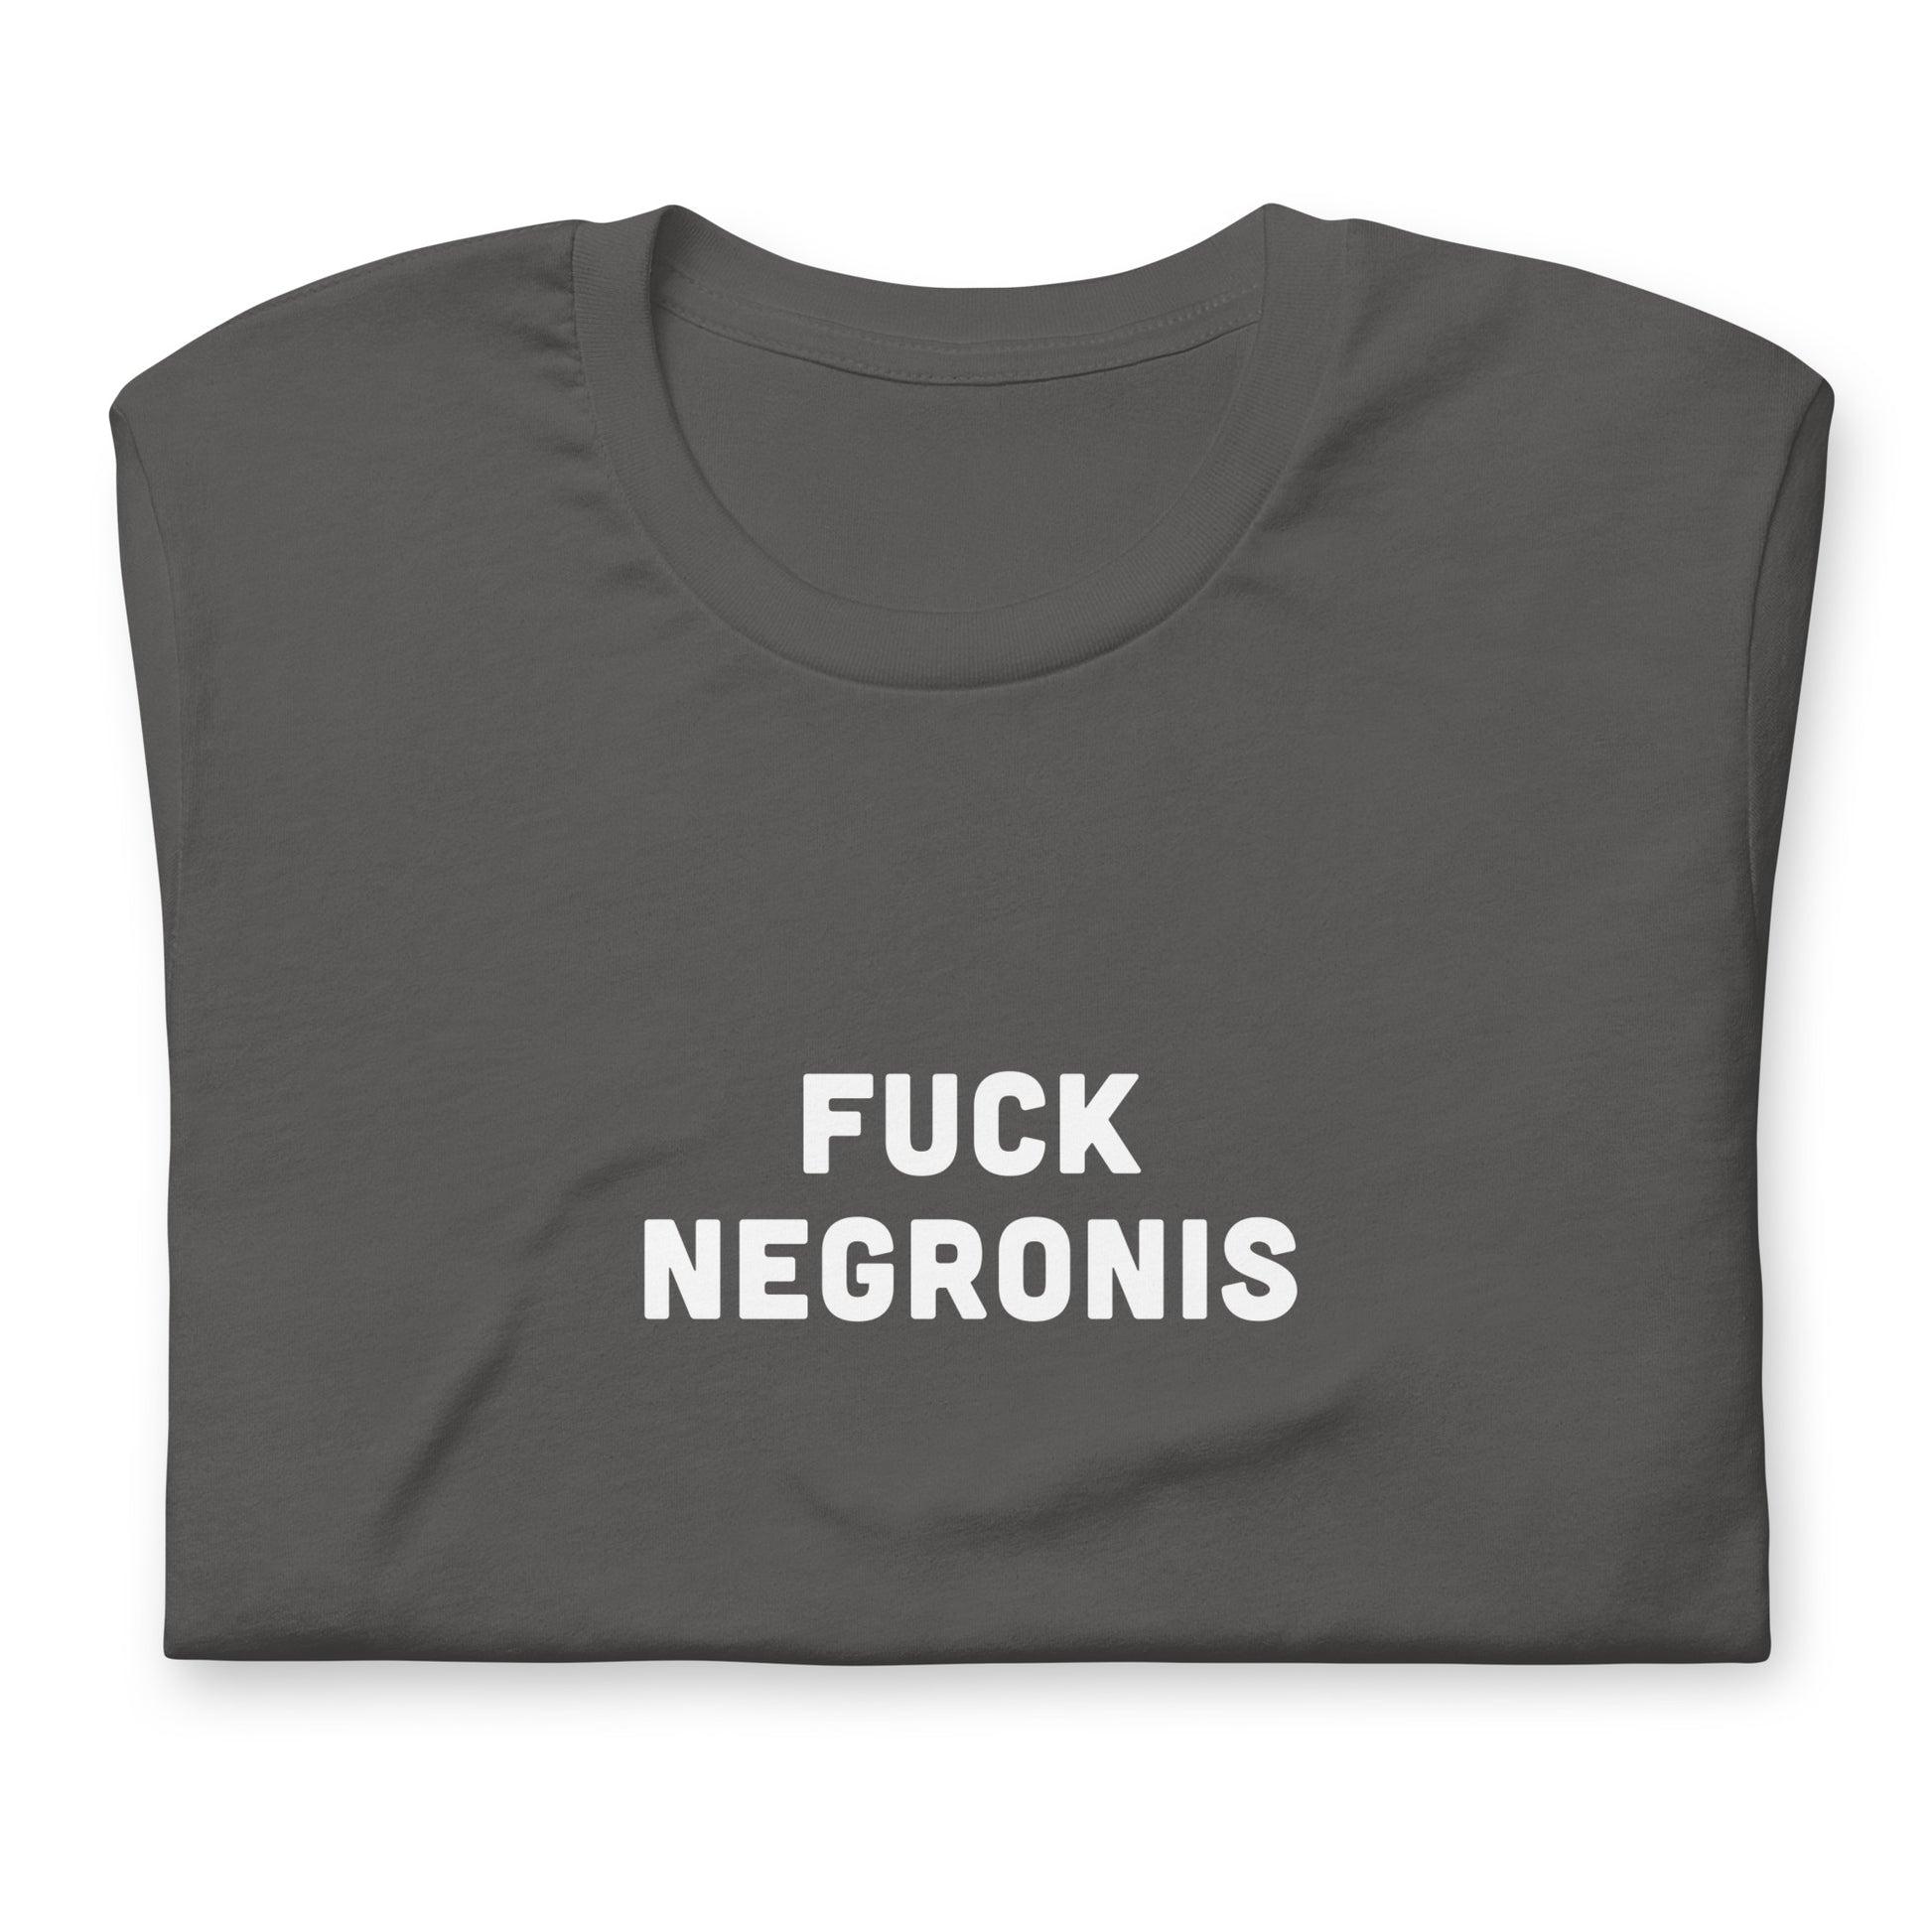 Fuck Negronis T-Shirt Size S Color Navy